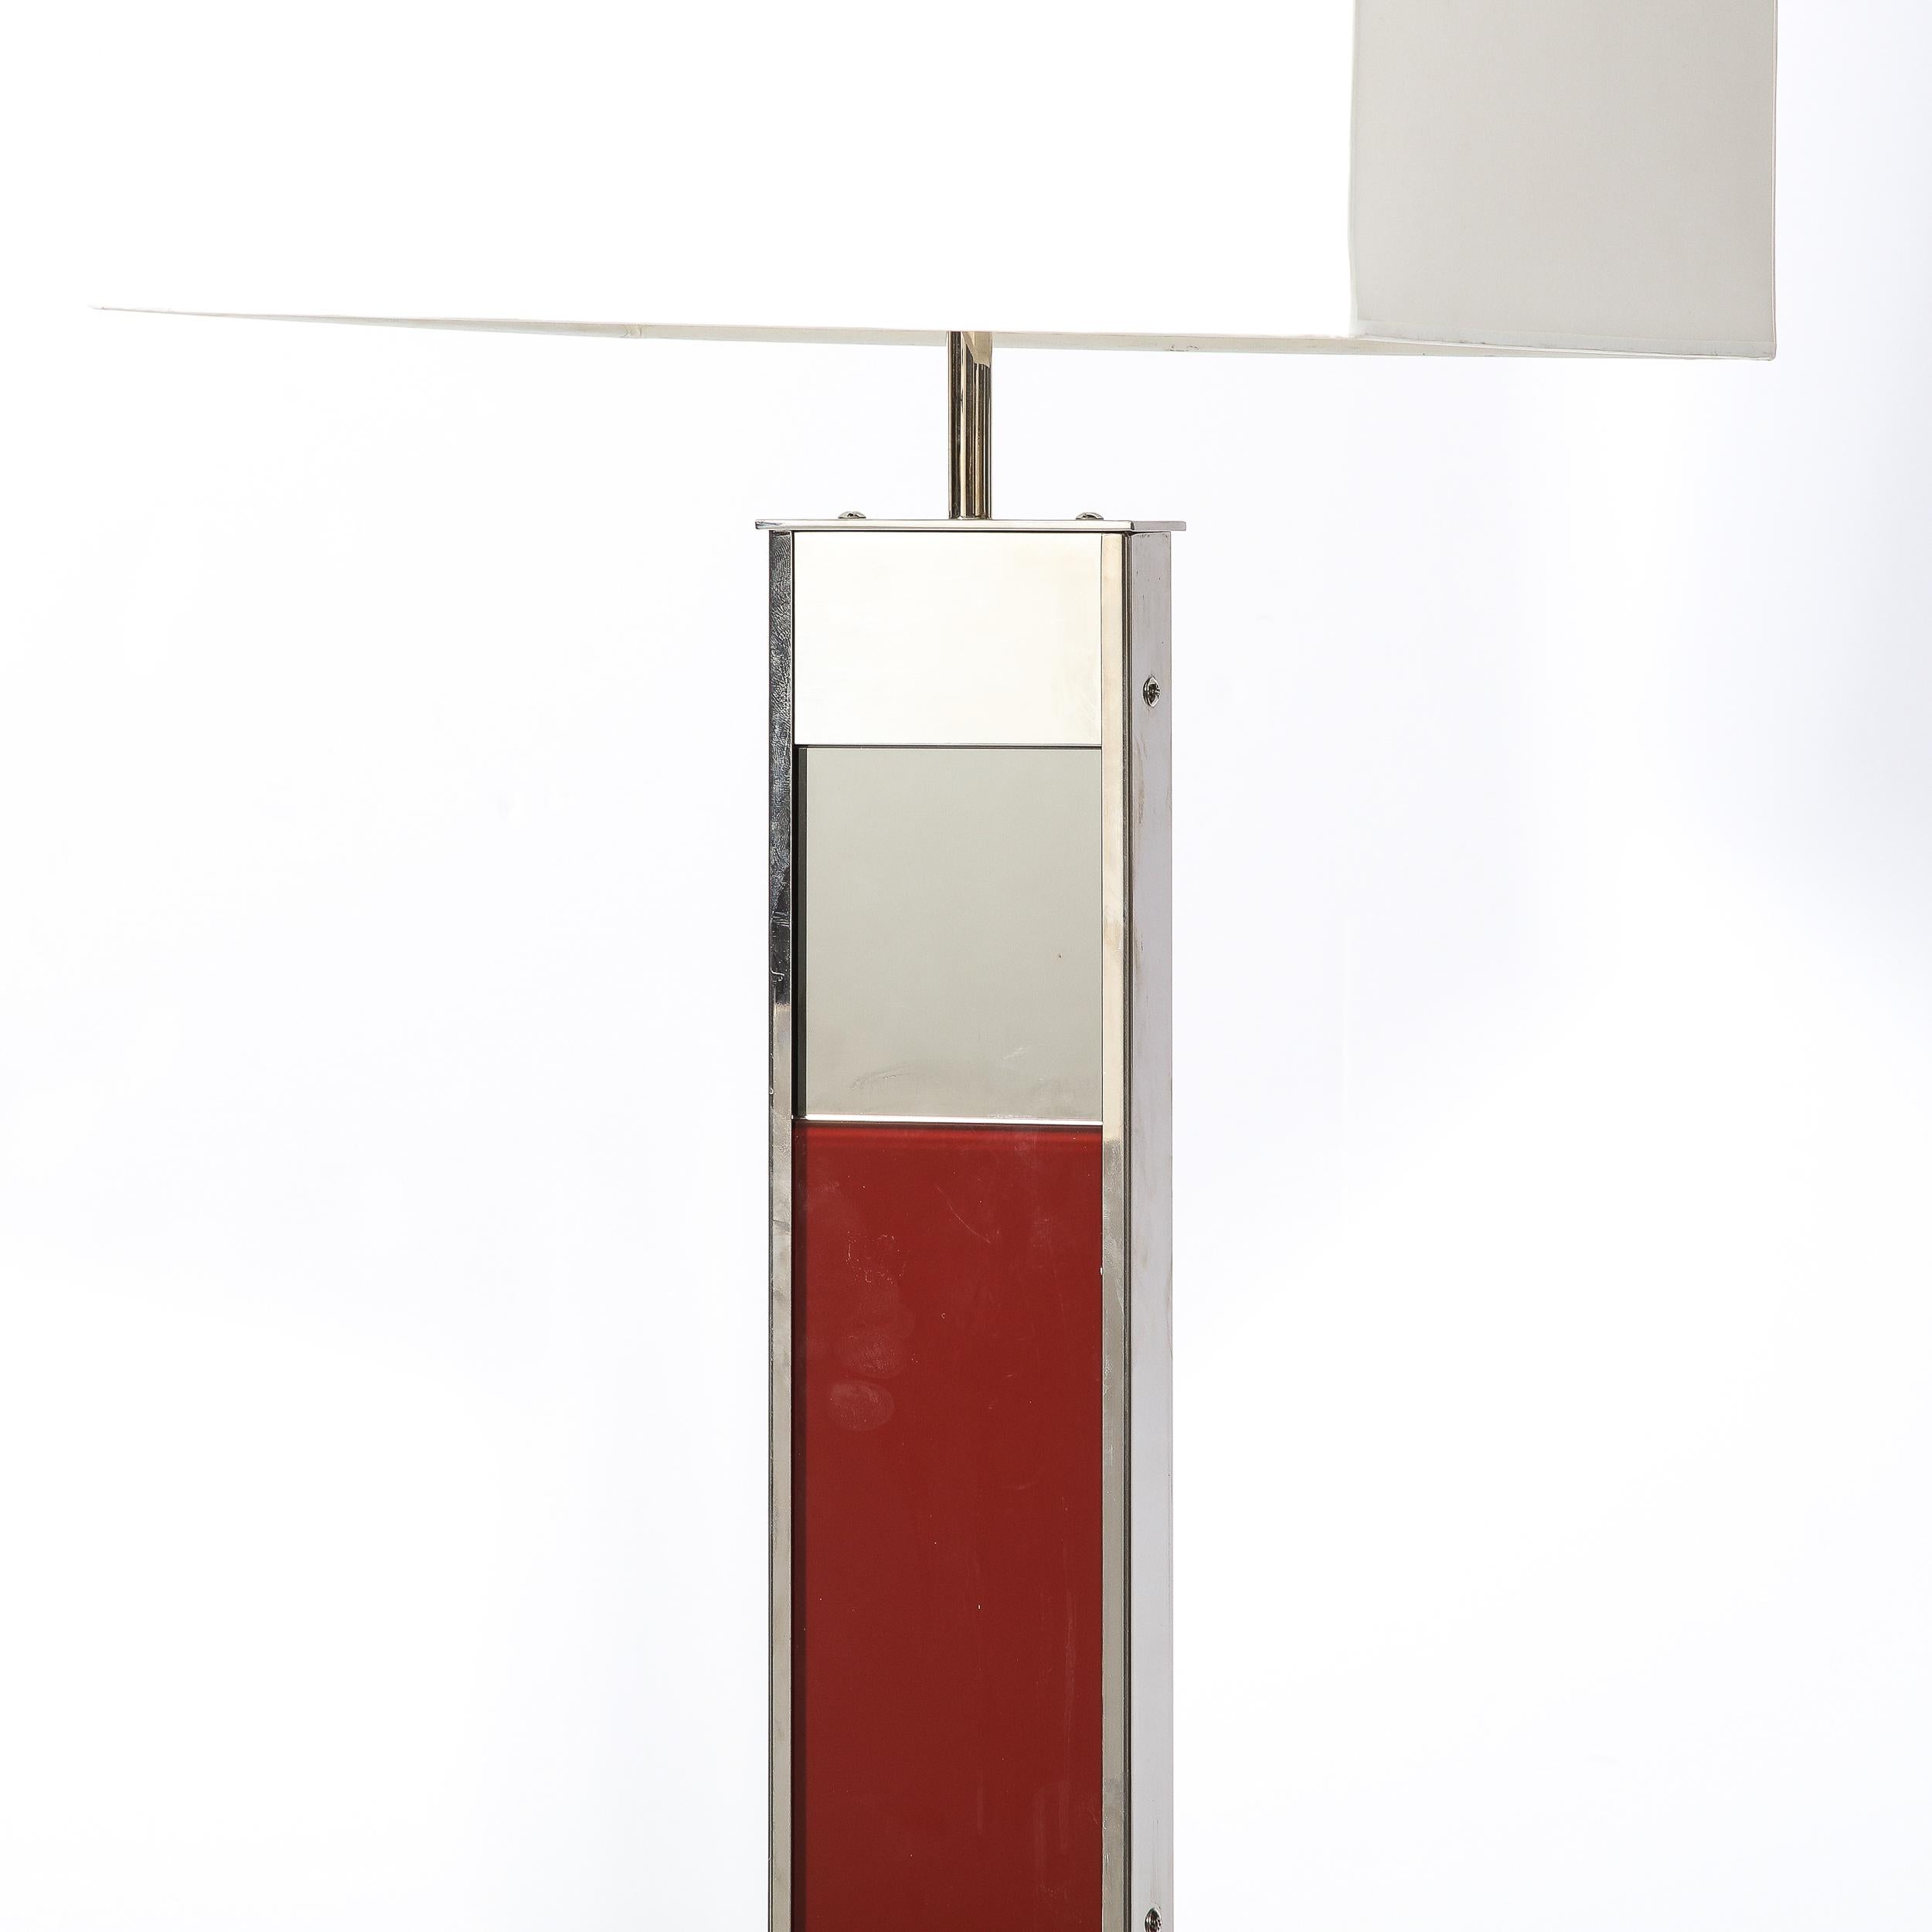 Modernist Nickel Floor Lamp with Stacked Oxblood, Umber, and Smoked Glass Body 1